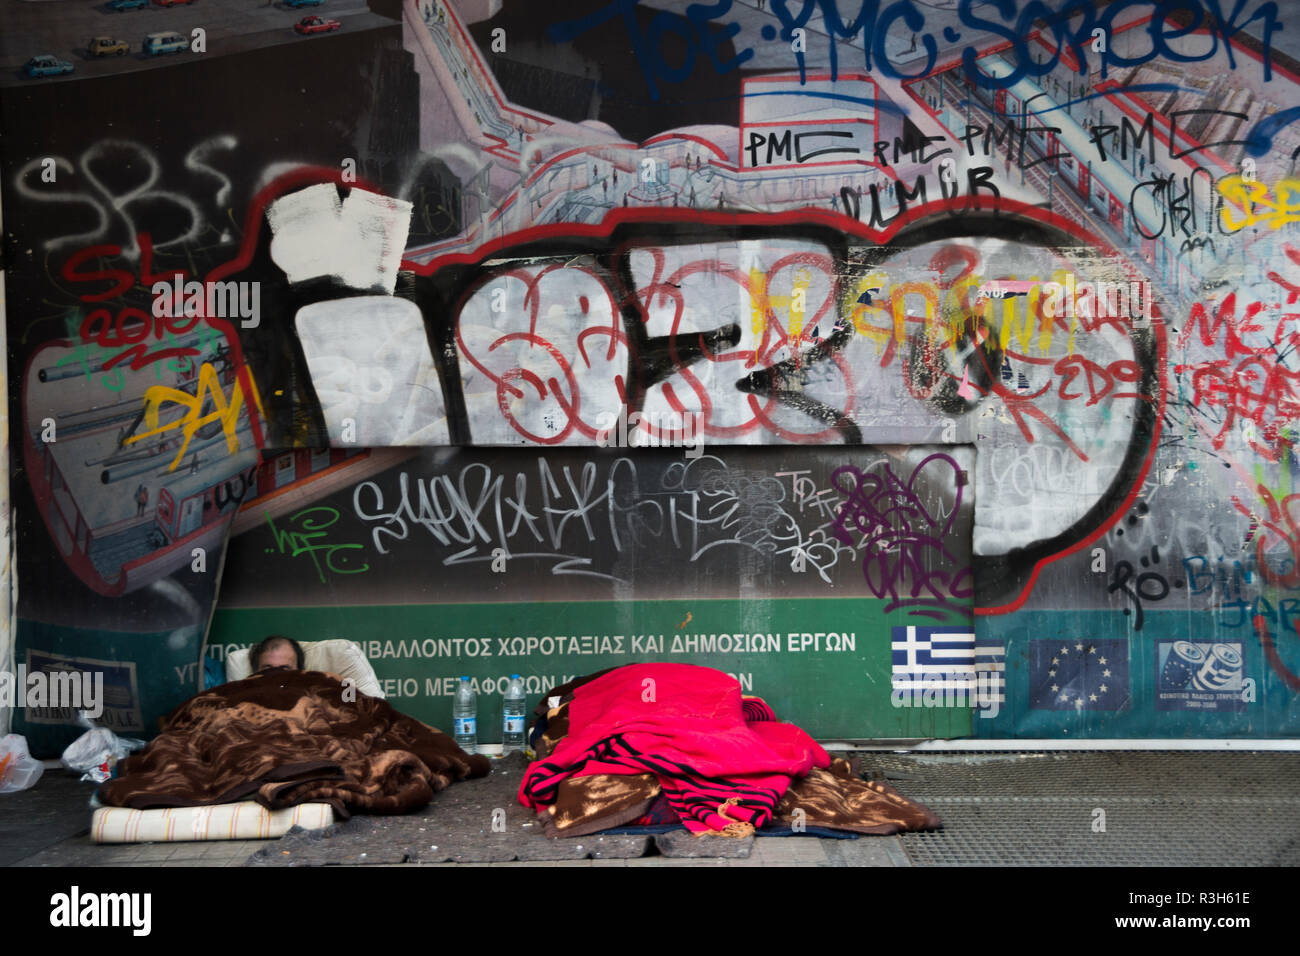 Athens, Greece 2013. Homeless people sleeping in public square Stock Photo